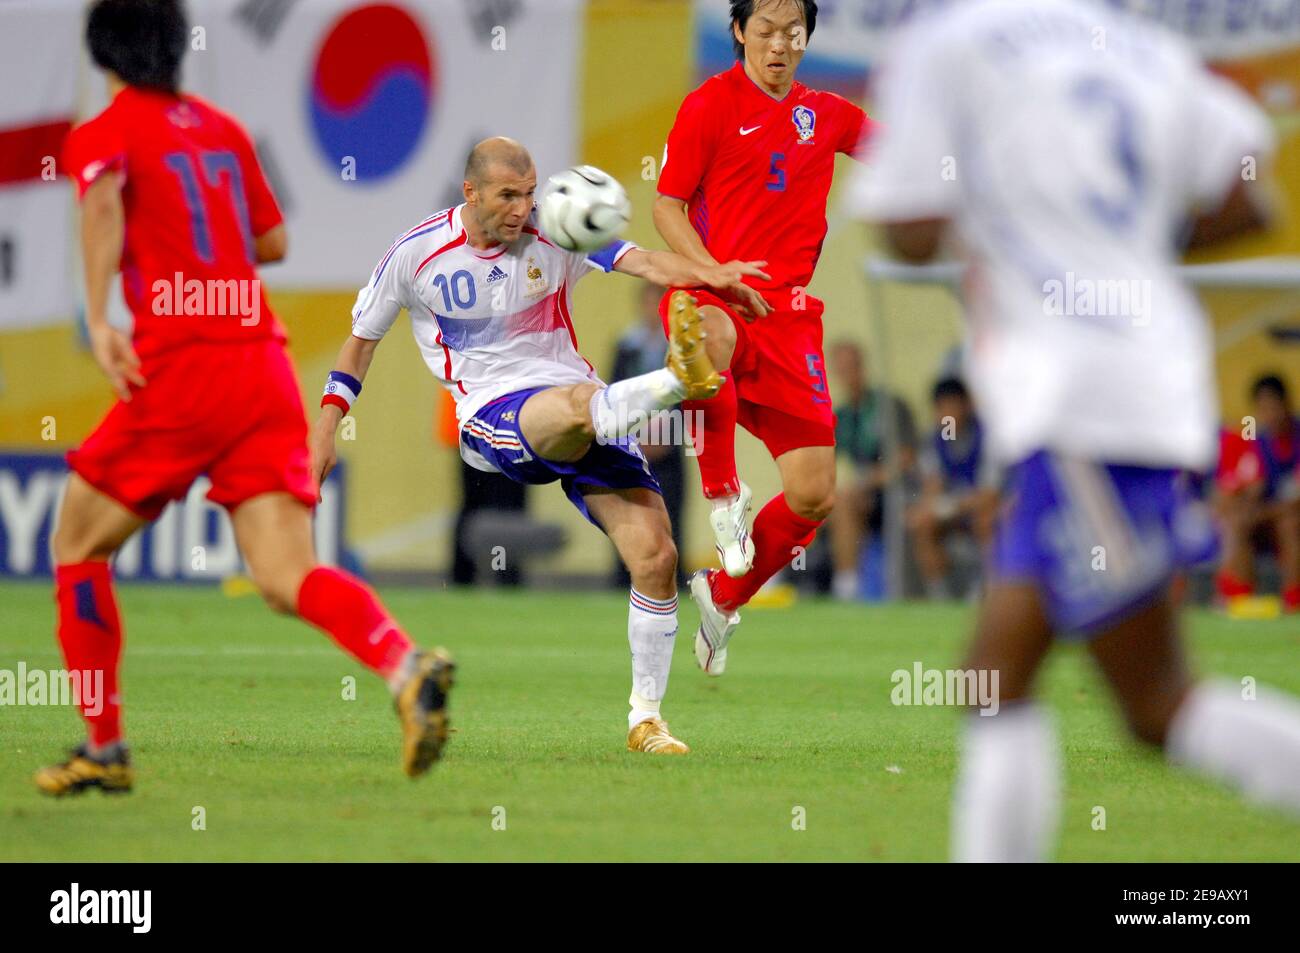 France's Zinedine Zidane during the World Cup 2006, Group G, France vs South Korea at the Zentralstadion stadium in Leipzig, Germany on June 18, 2006. The game ended in a draw 1-1. Photo by Gouhier-Hahn-Orban/Cameleon/ABACAPRESS.COM Stock Photo